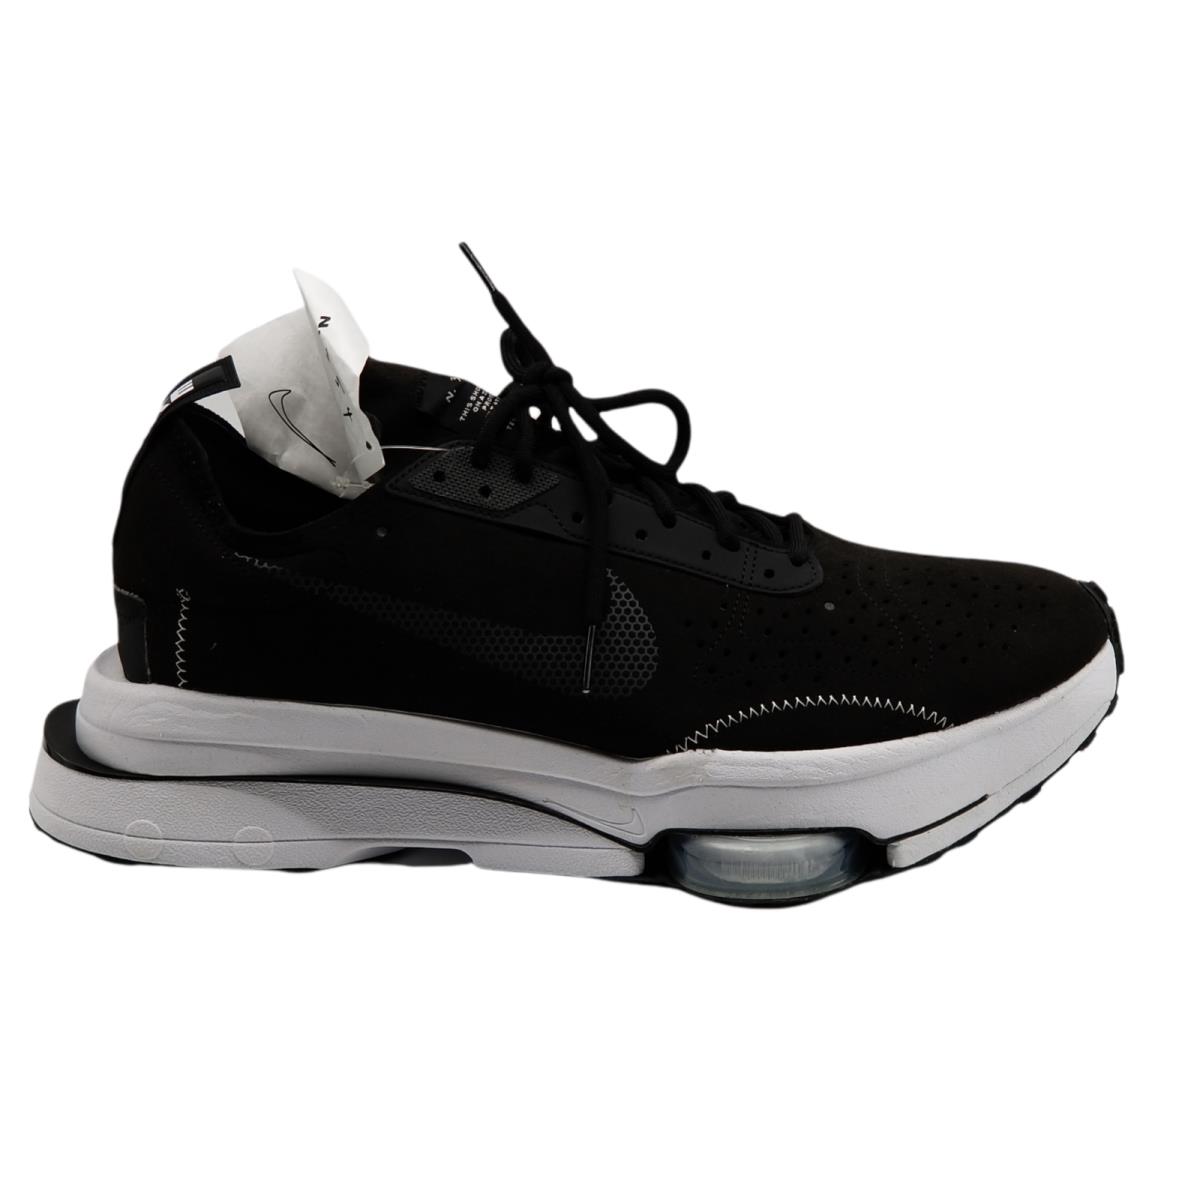 Nike Air Zoom Type Unisex Black Low Top Athletic Sneaker Shoes Size M11/W12.5